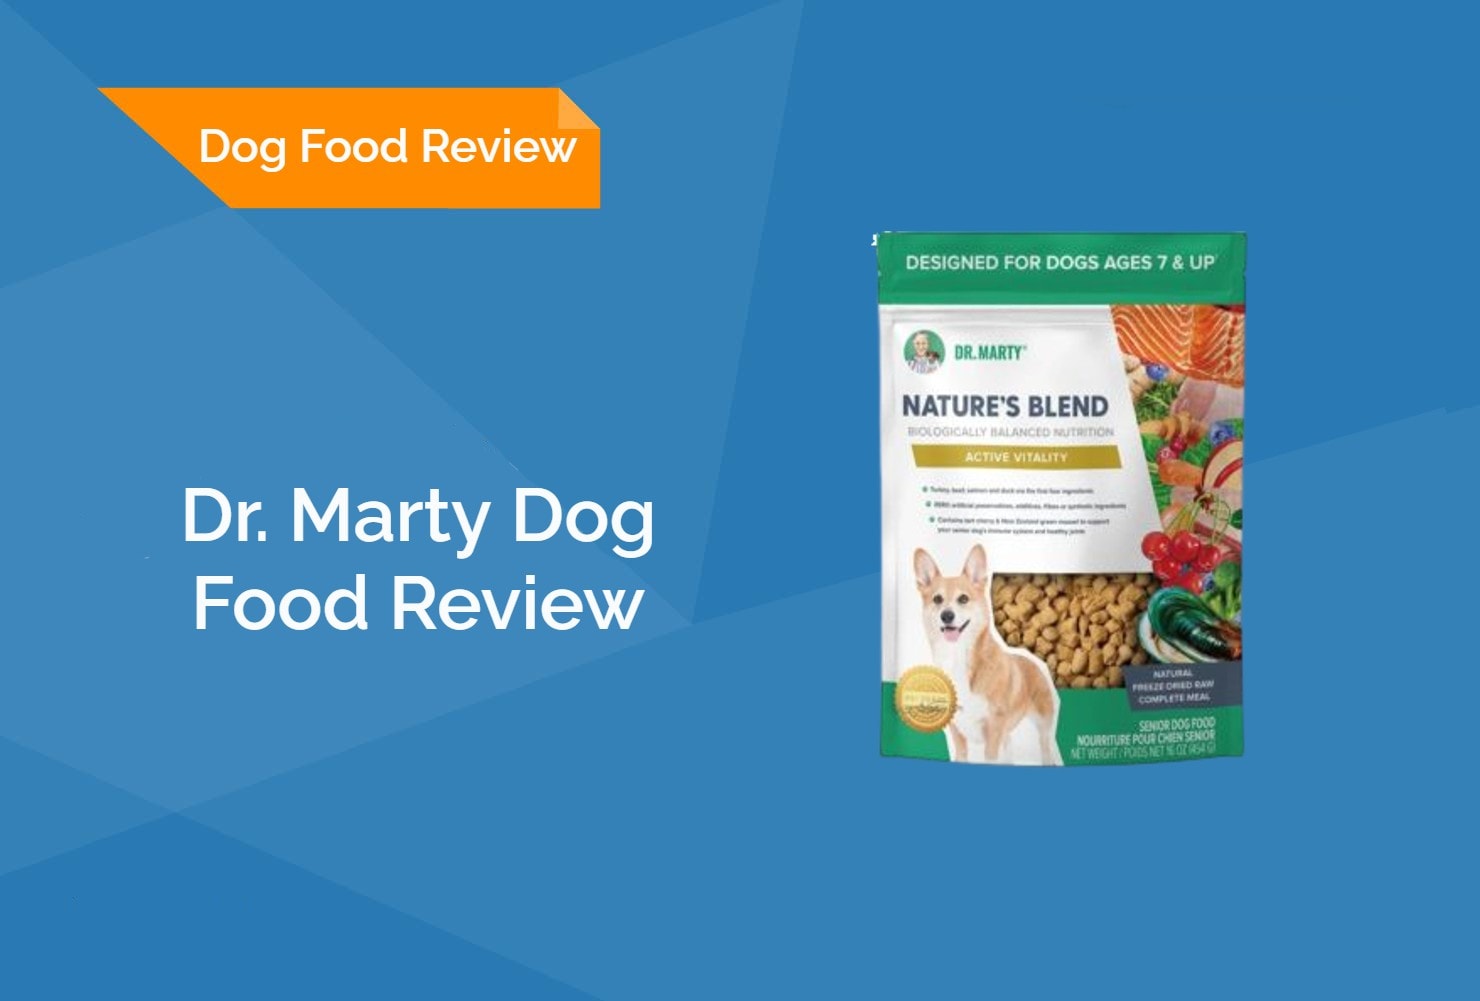 Dr. Marty Dog Food Review